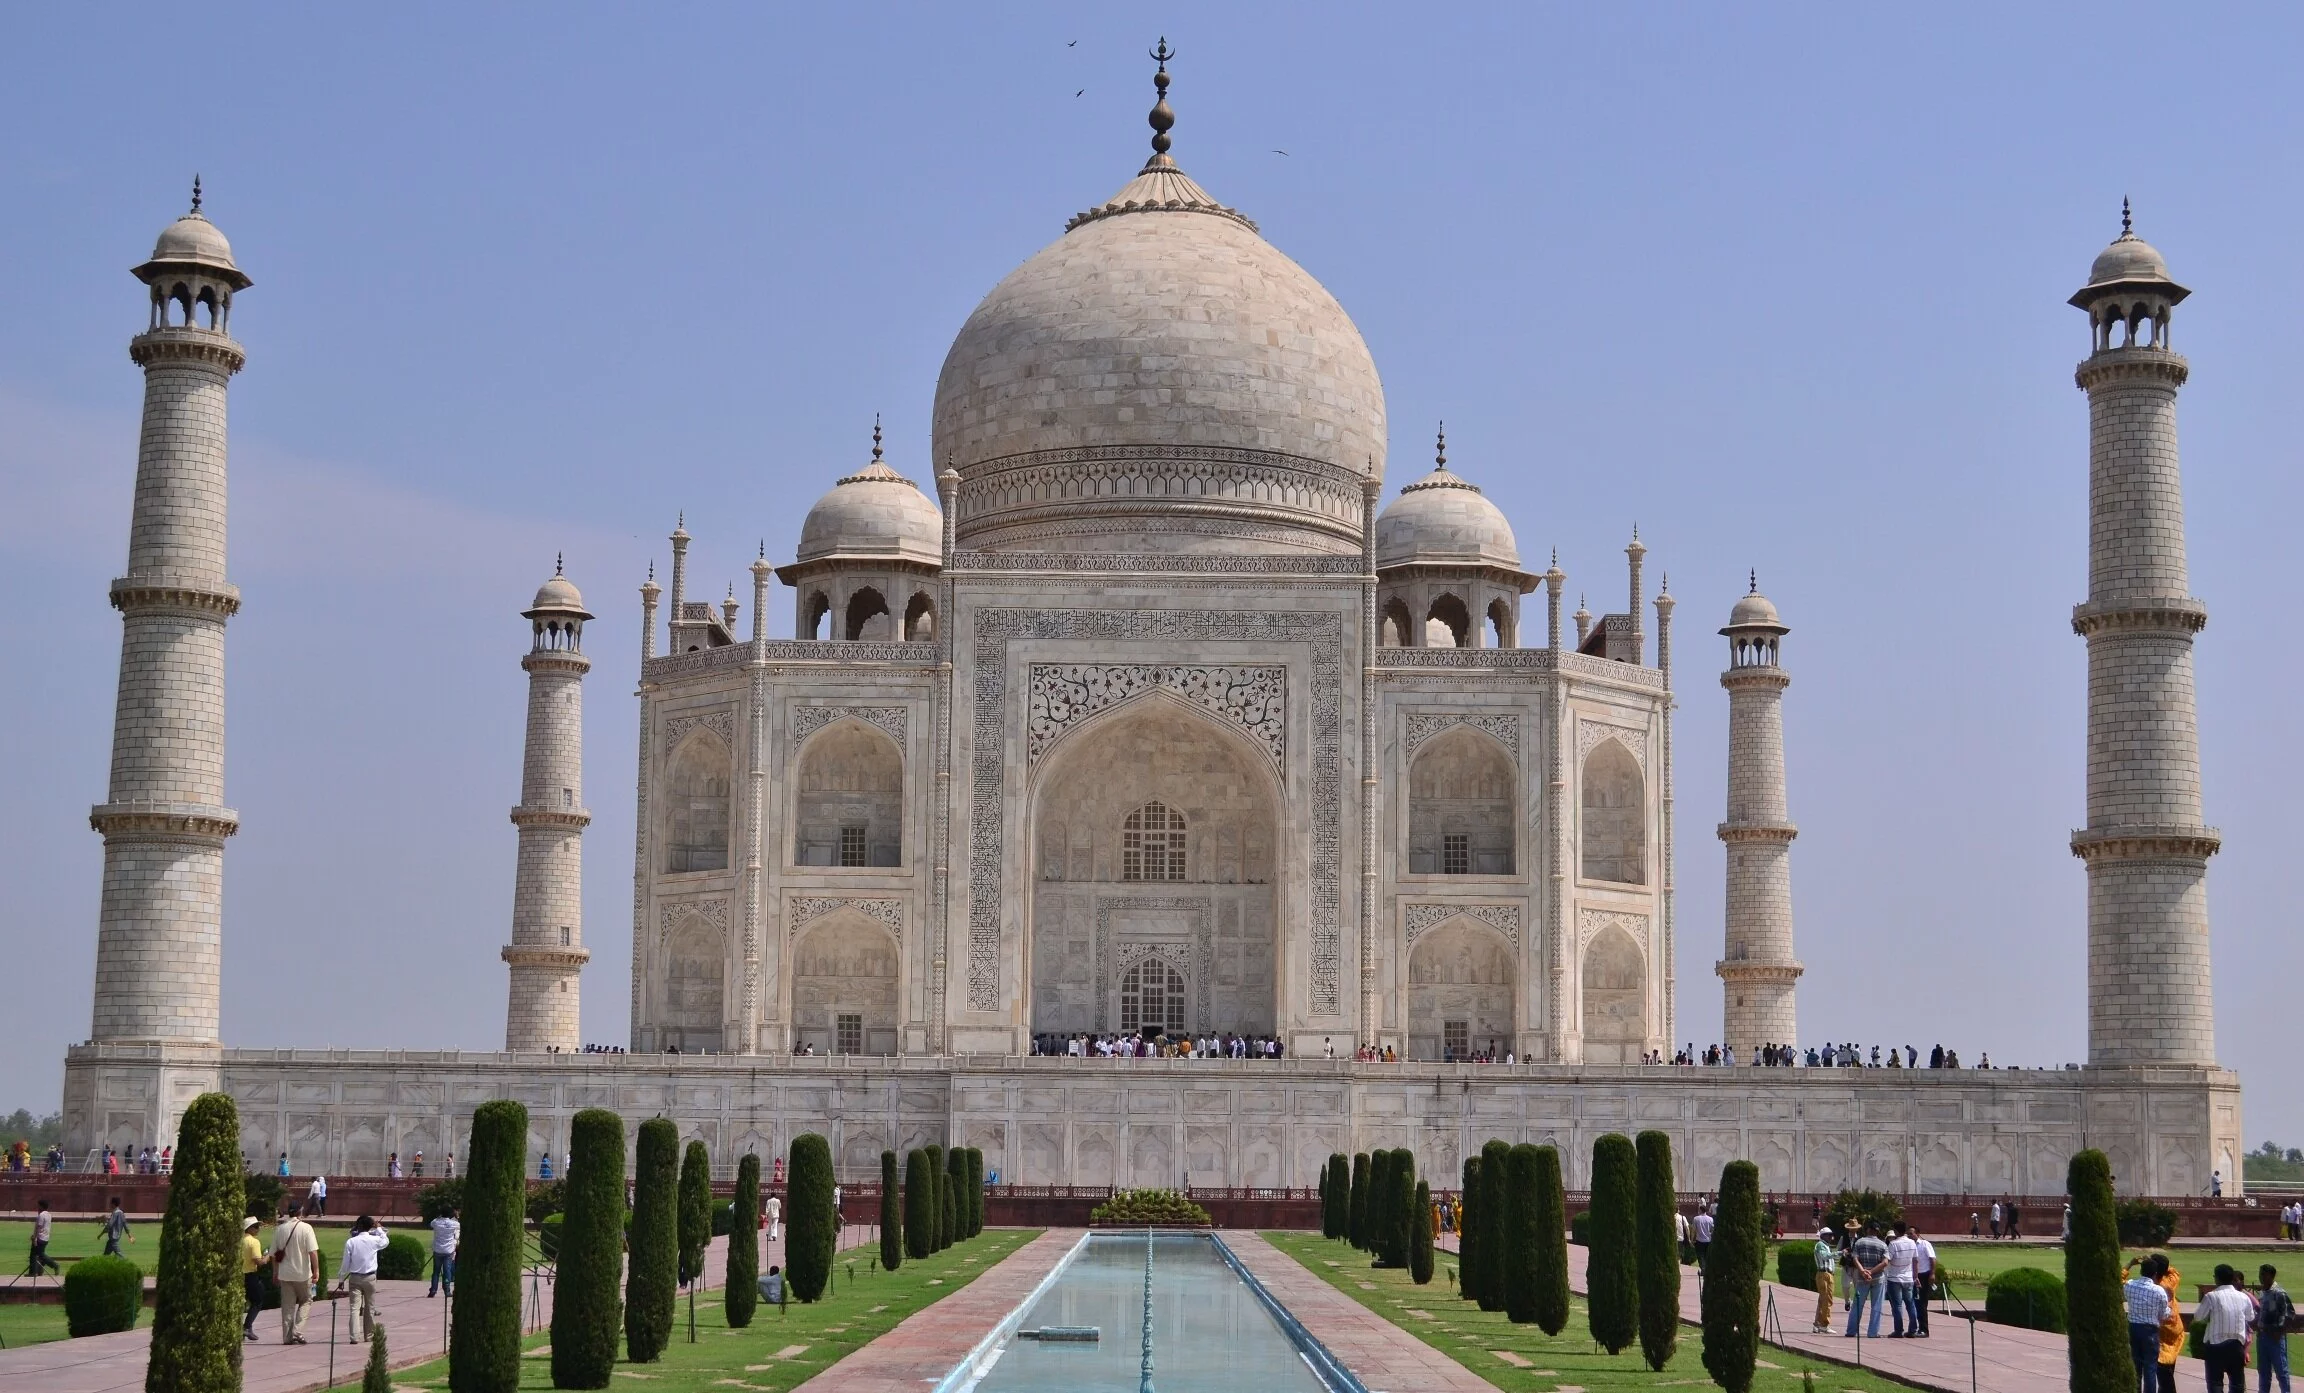 Make your Taj Mahal Day Tour to experience the Golden Era of Mughals